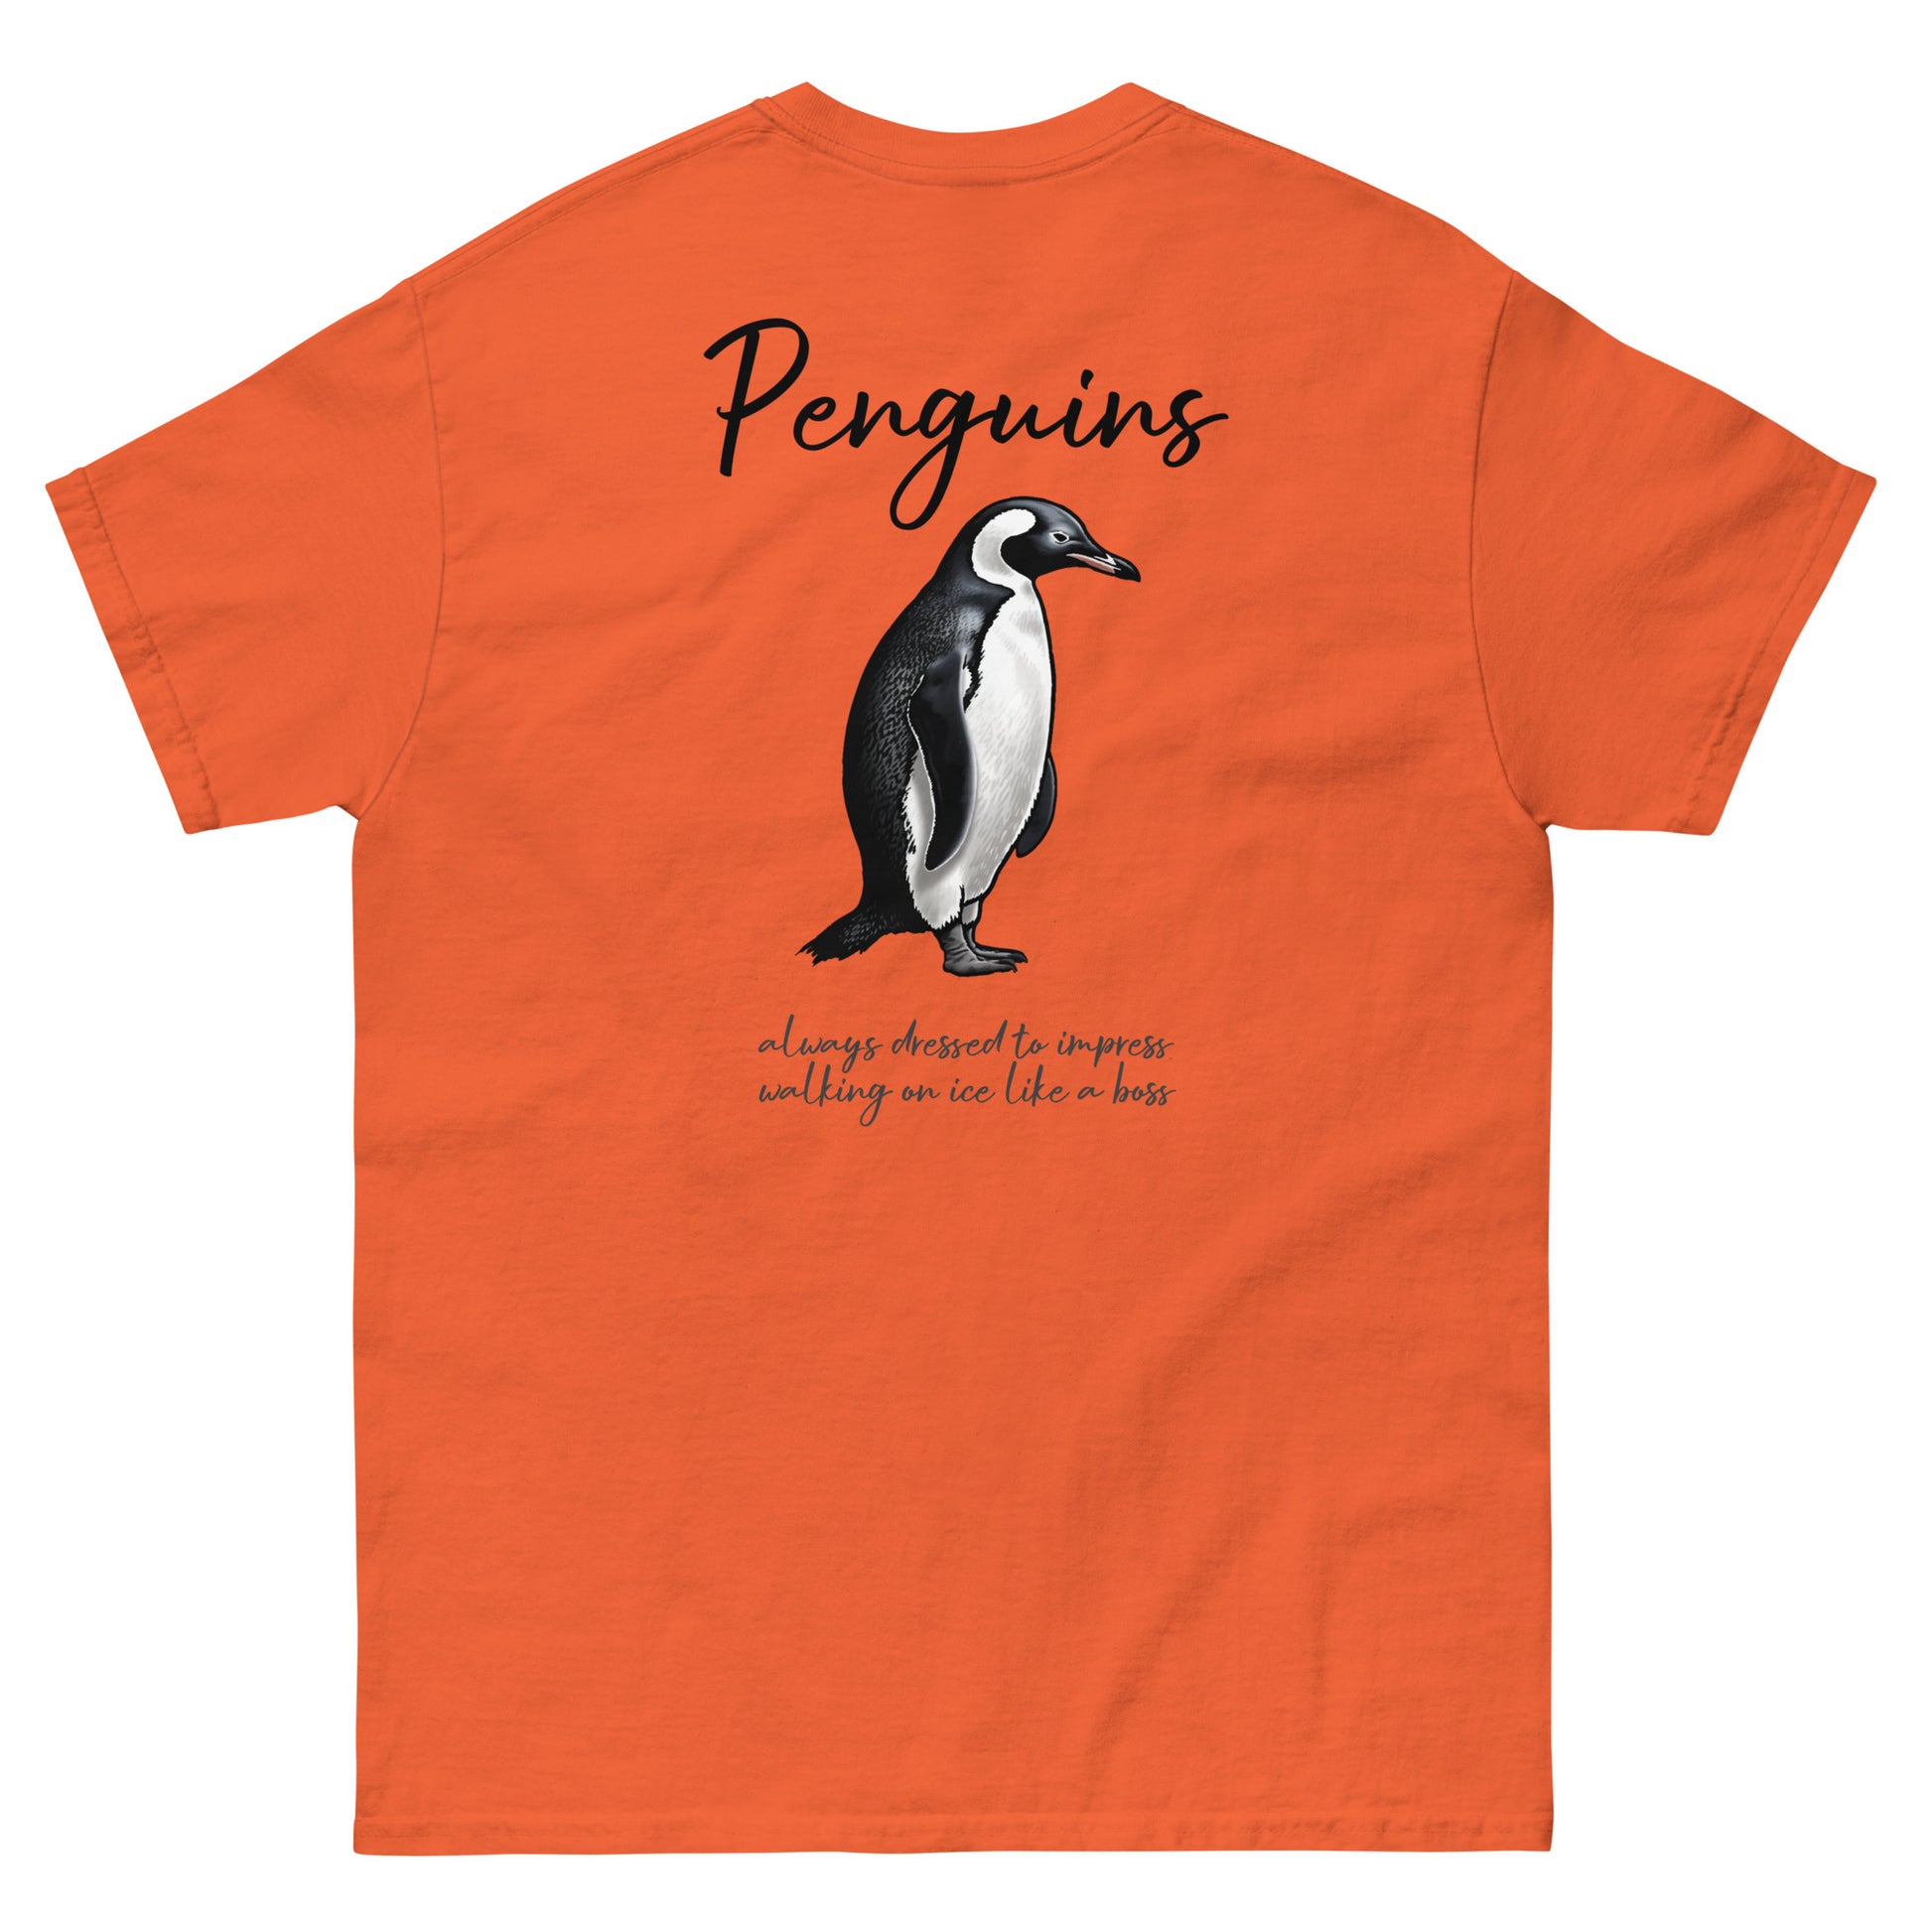 Orange High Quality Tee - Front Design with a Penguin on left chest - Back Design with a Penguin and a Phrase "Penguins:always dressed to impress, walking on ice like a boss" print